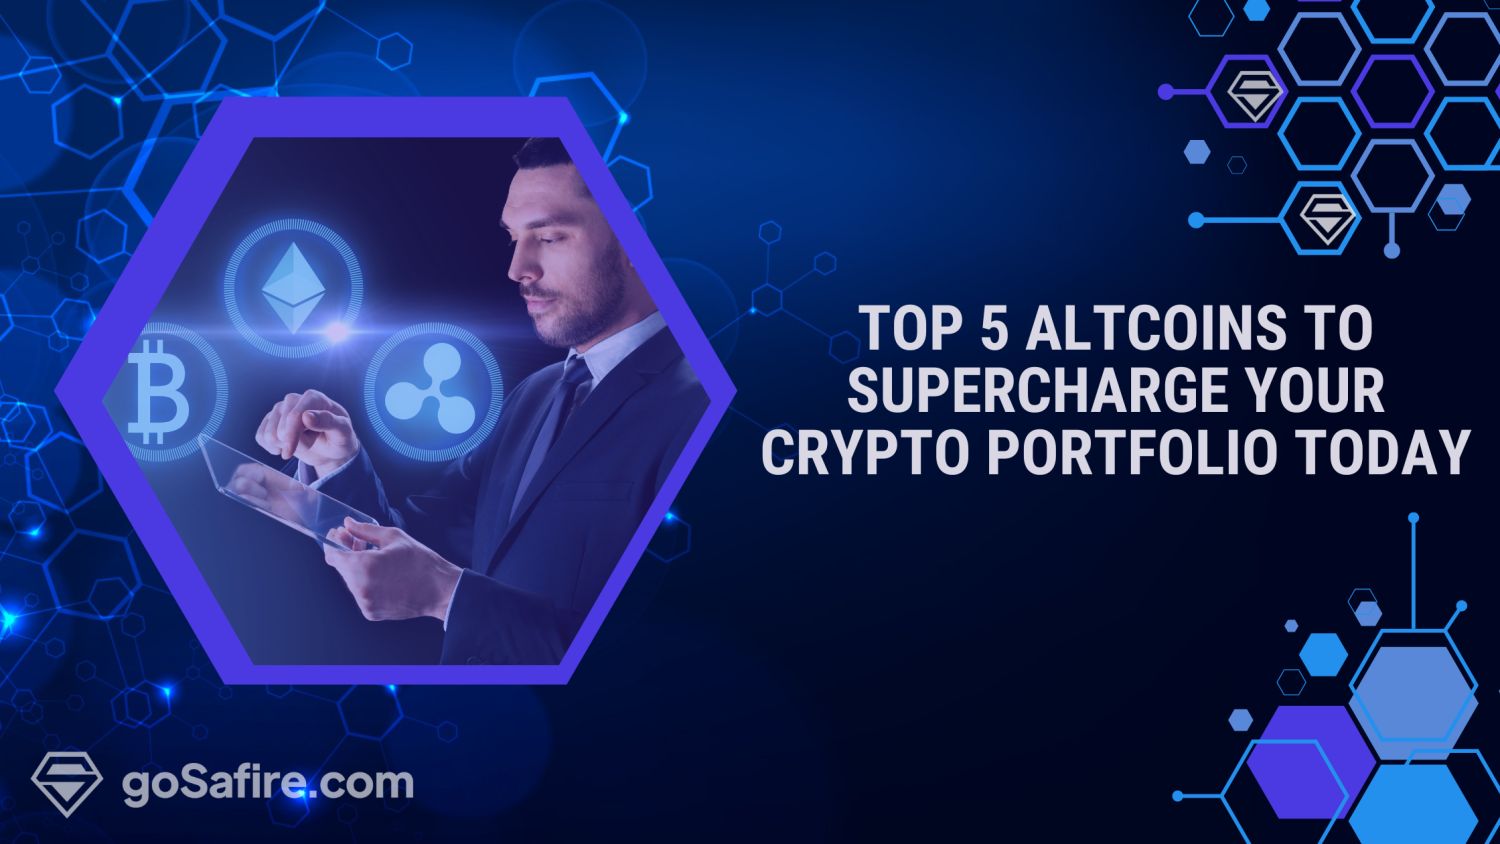 Top 5 Altcoins You Need in Your Portfolio Right Now